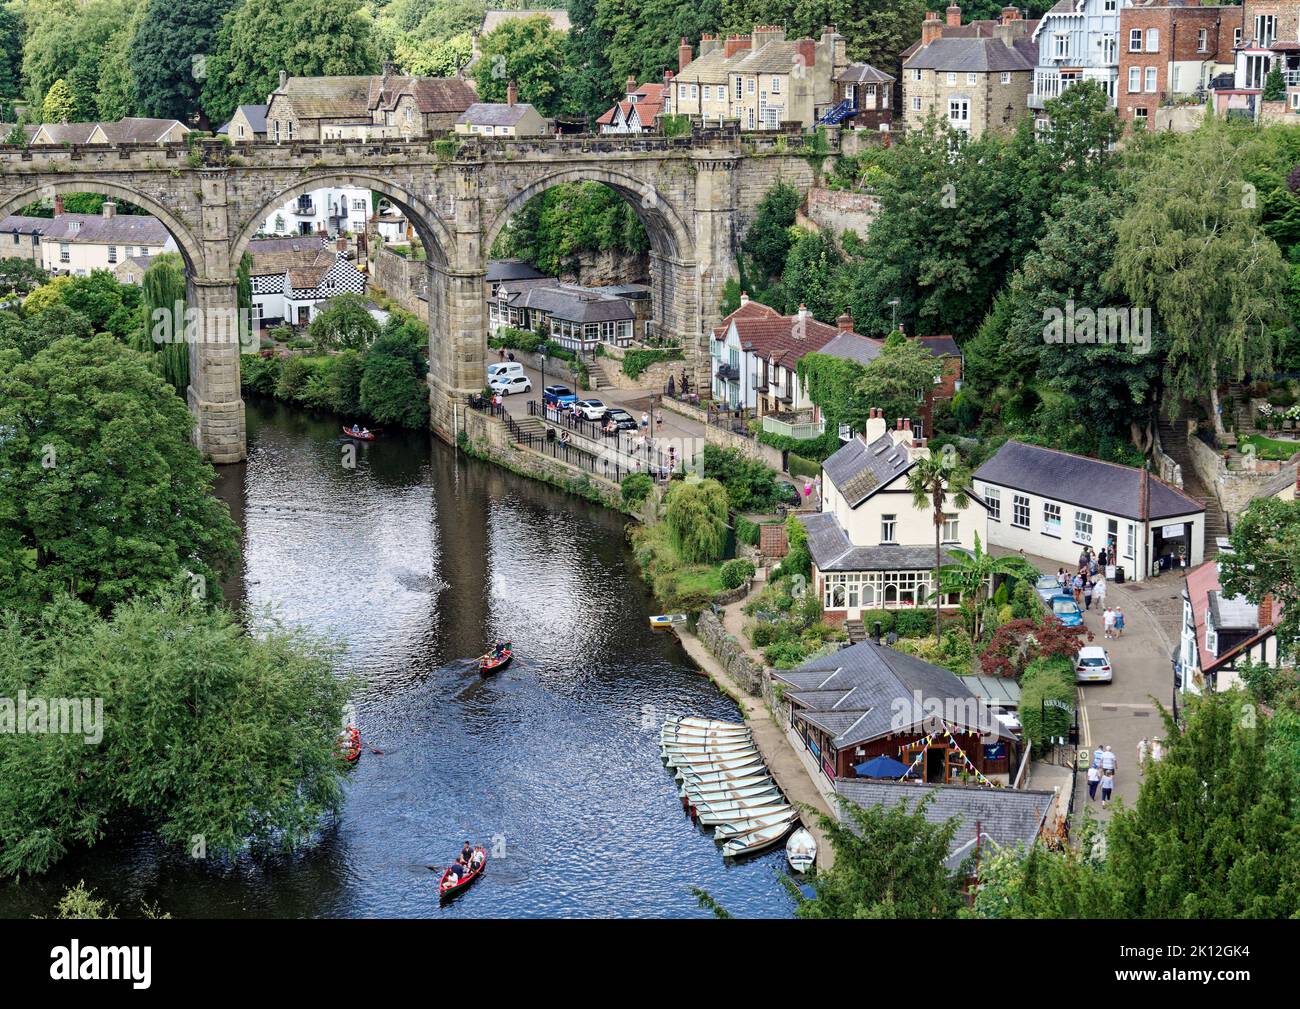 Knaresborough, North Yorkshire - View of the River Nidd and the iconic railway viaduct from the castle ramparts. Stock Photo